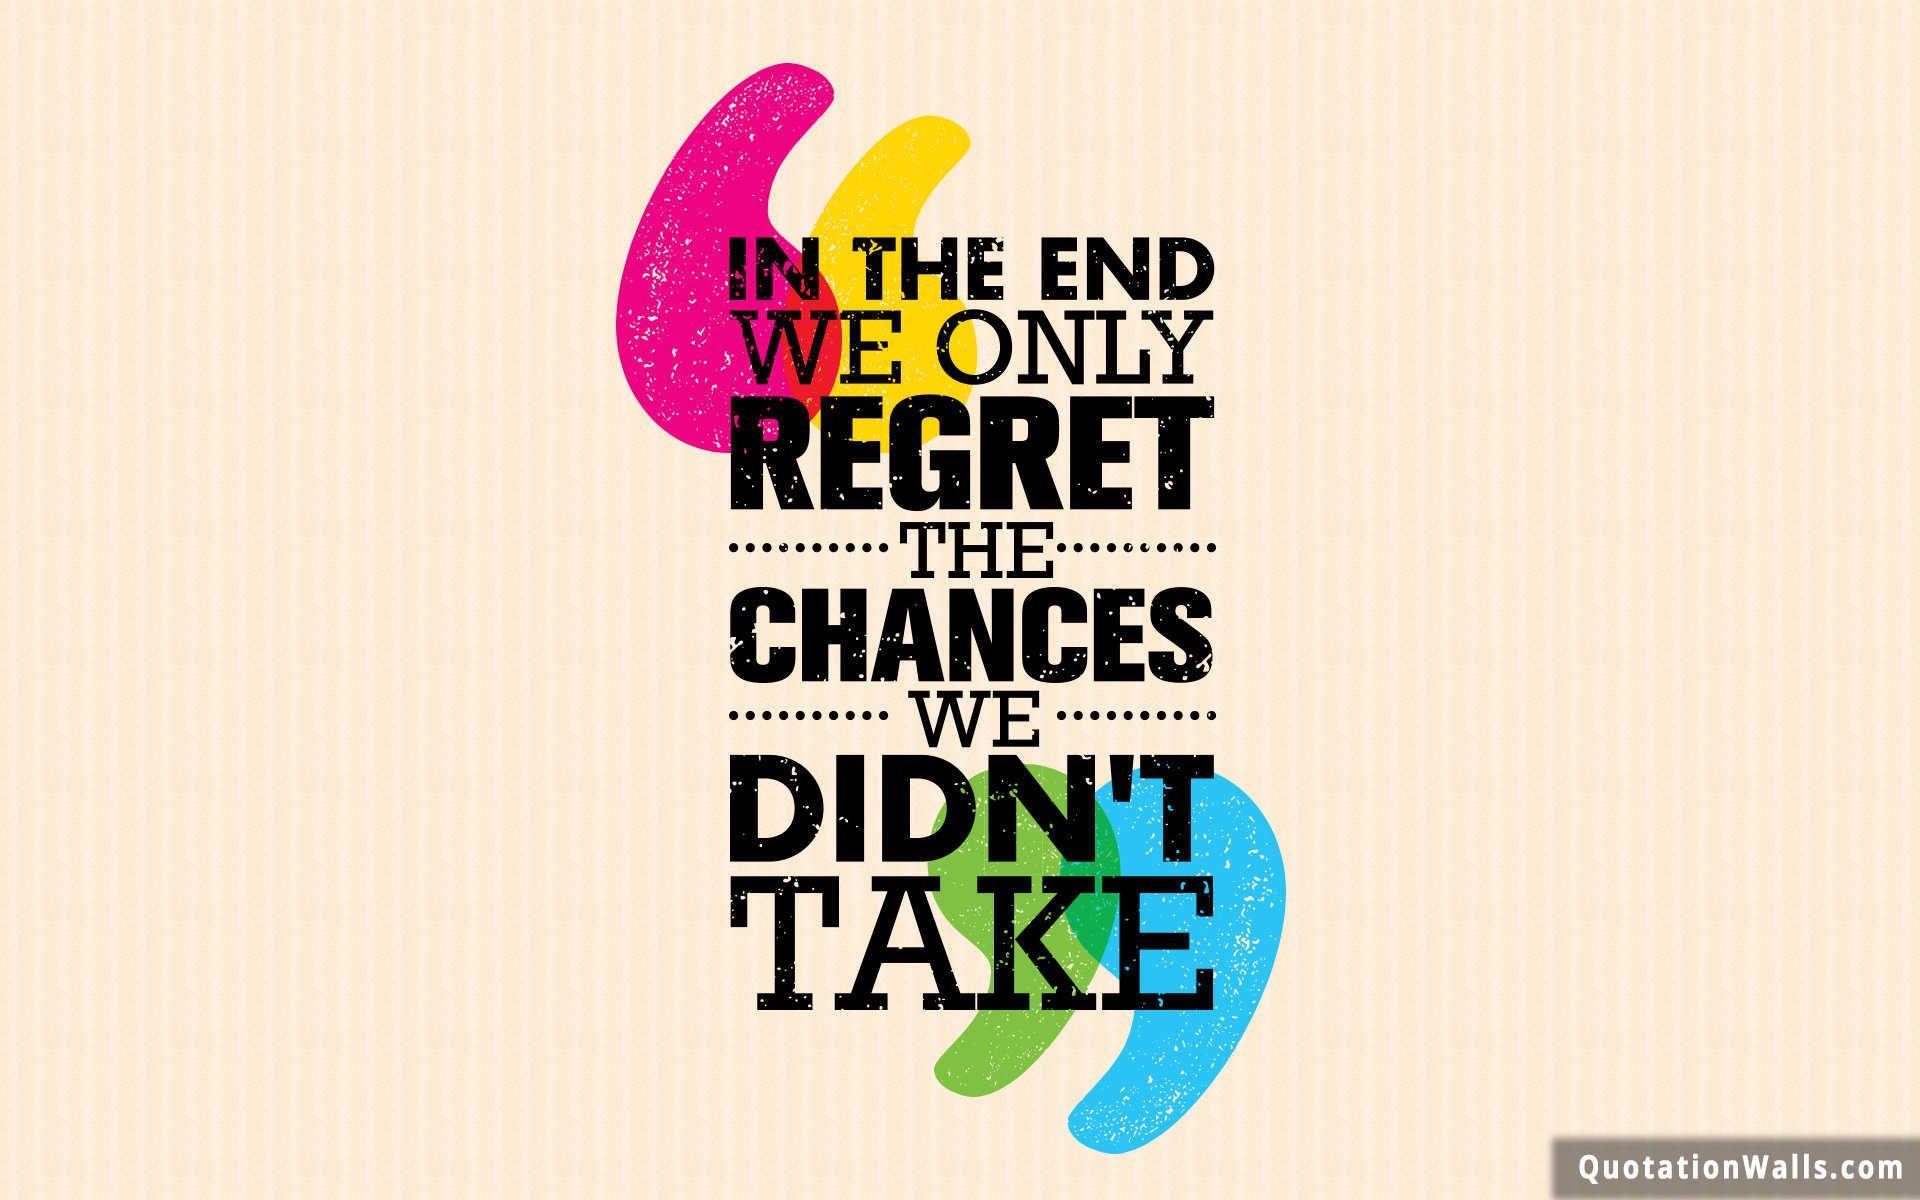 Regret Quotes Wallpaper For Mobile. Image, Picture, Photo Free